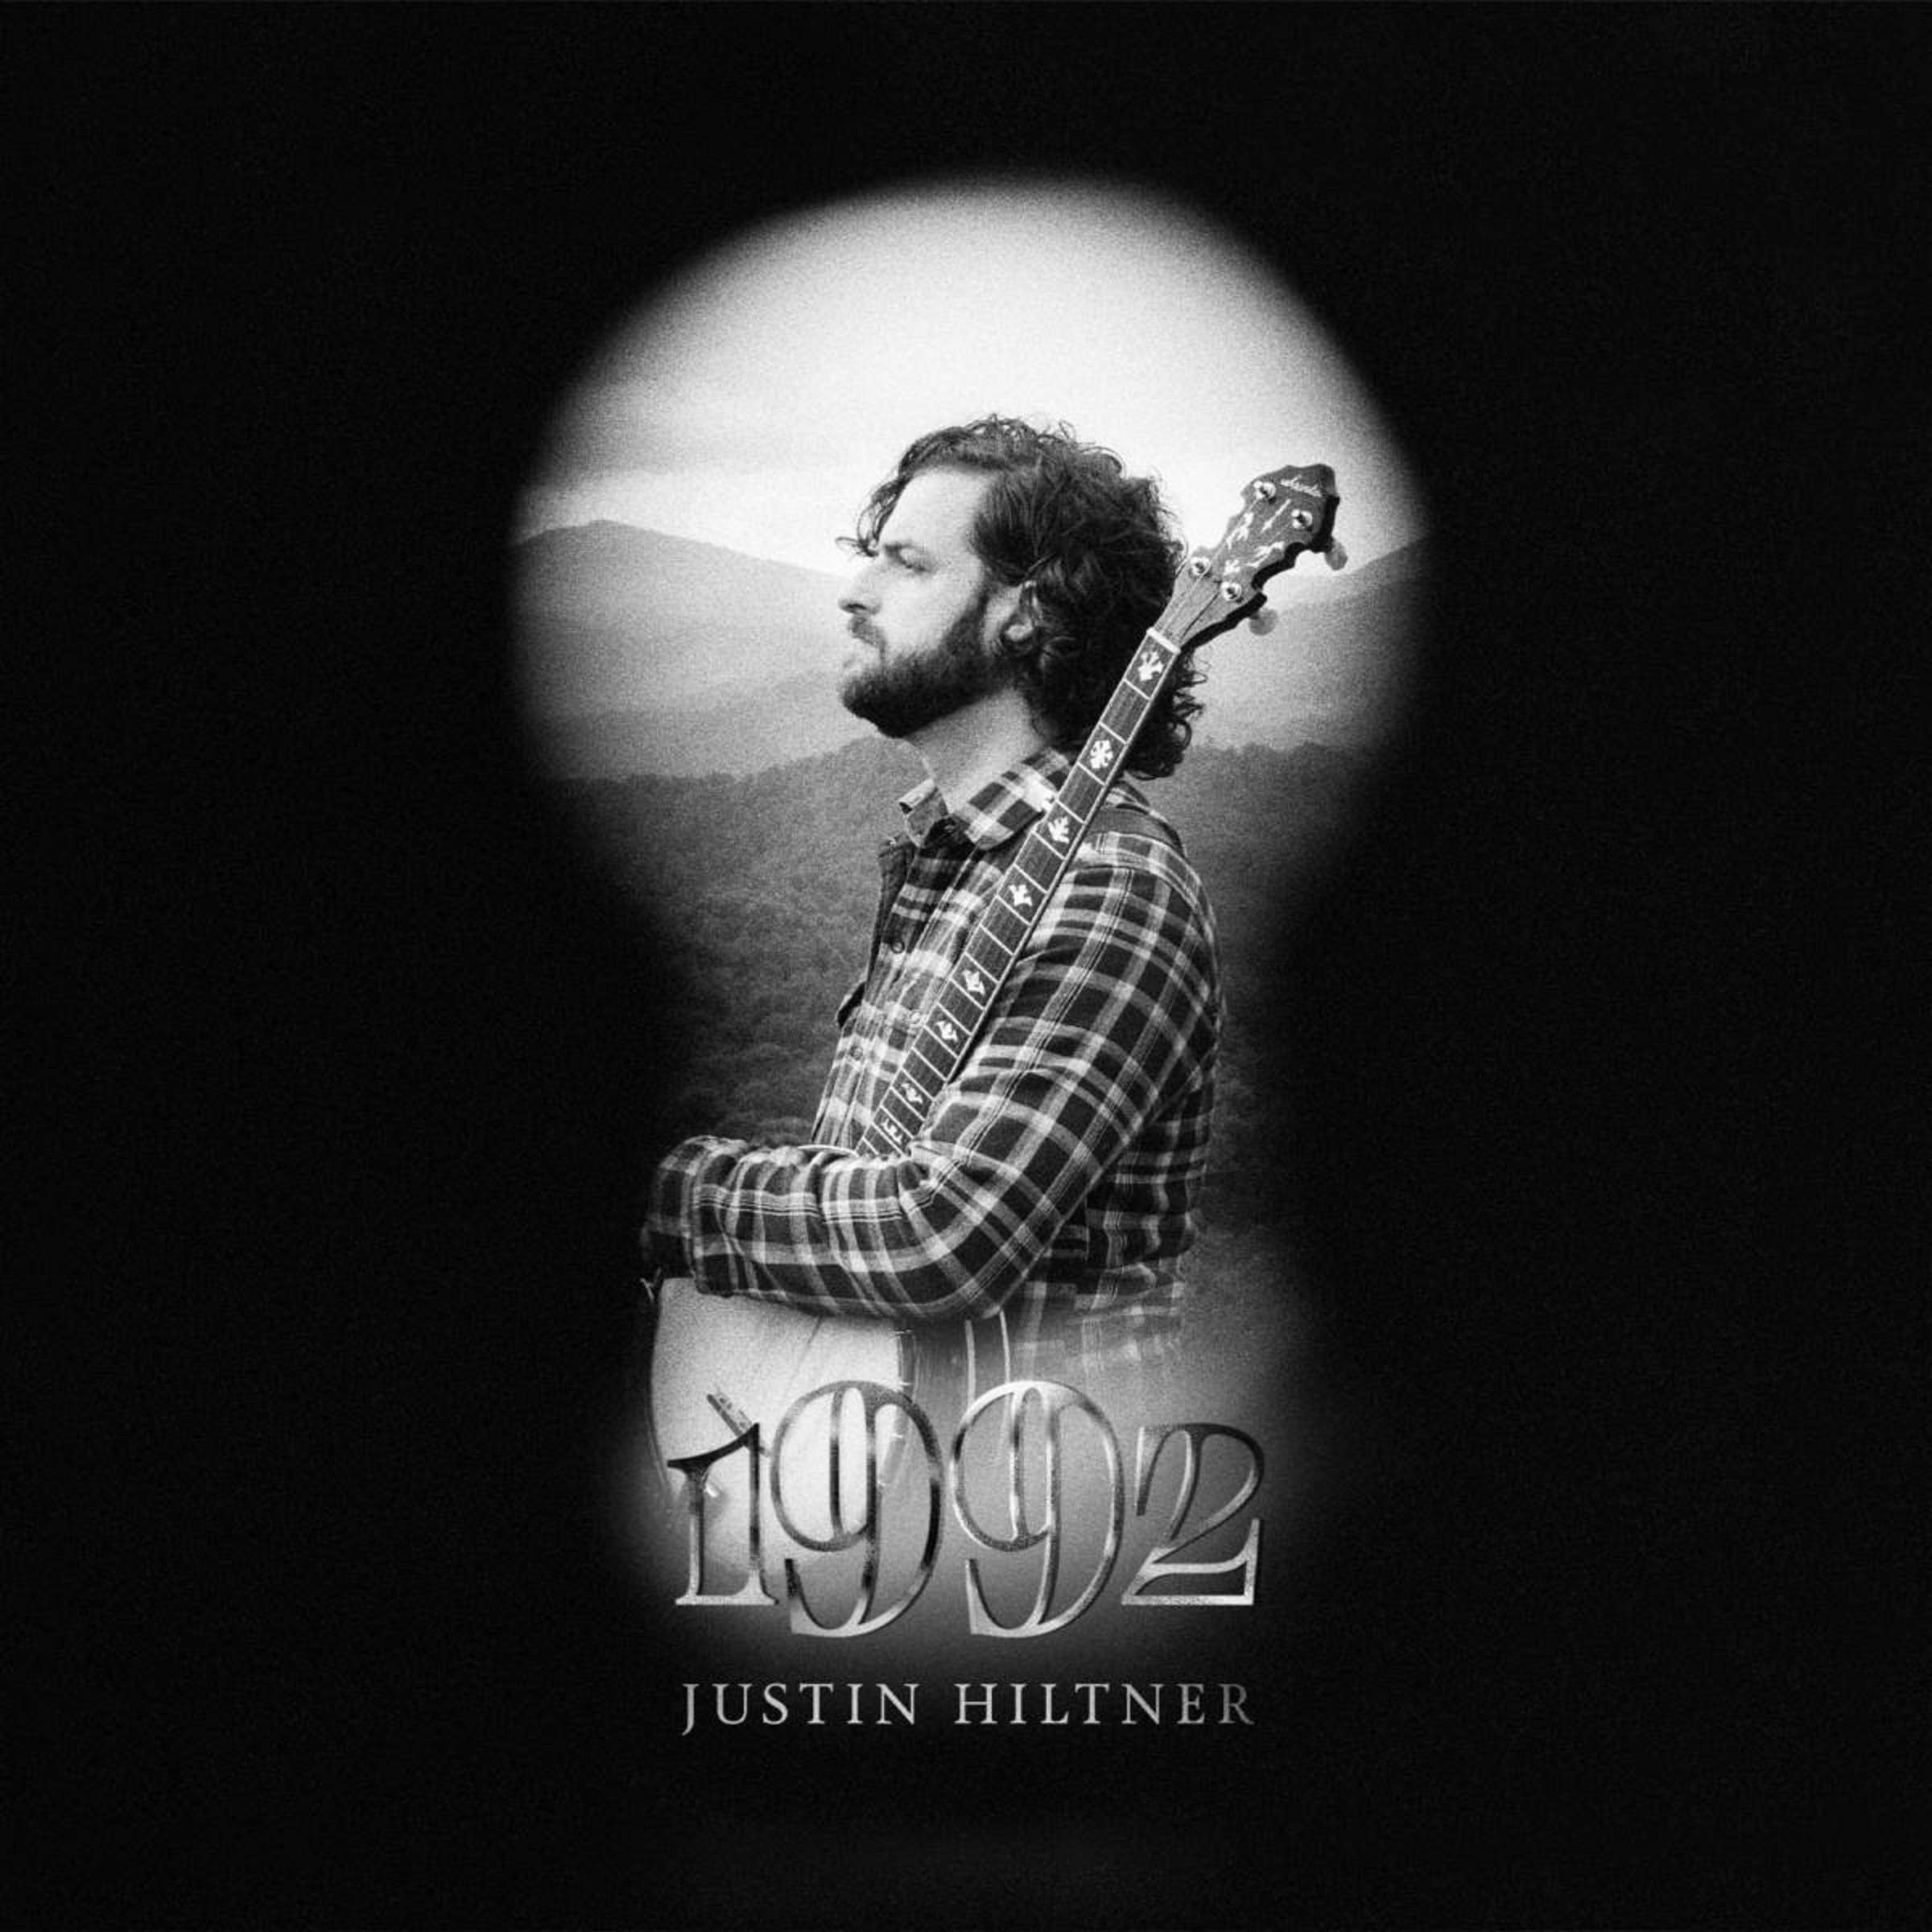 Queer, Disabled Banjoist & Songwriter Justin Hiltner Challenges Bluegrass and Appalachian Stereotypes on Solo Debut, 1992